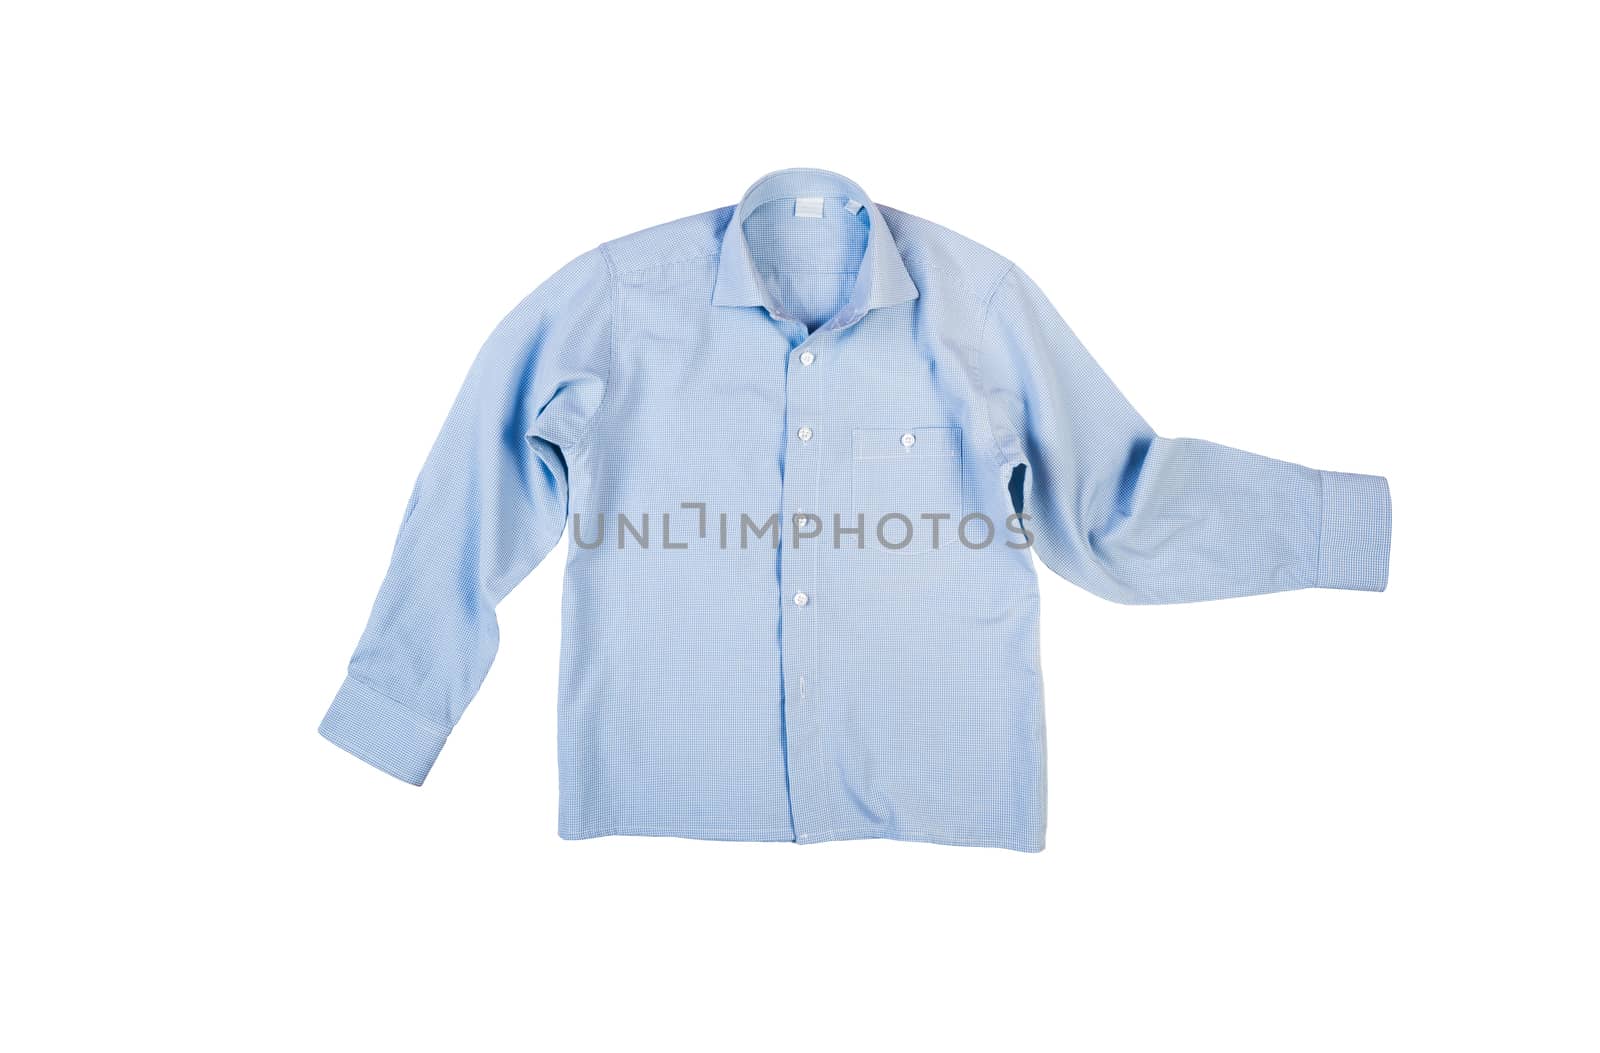  blue clean ironed men's shirts by iprachenko